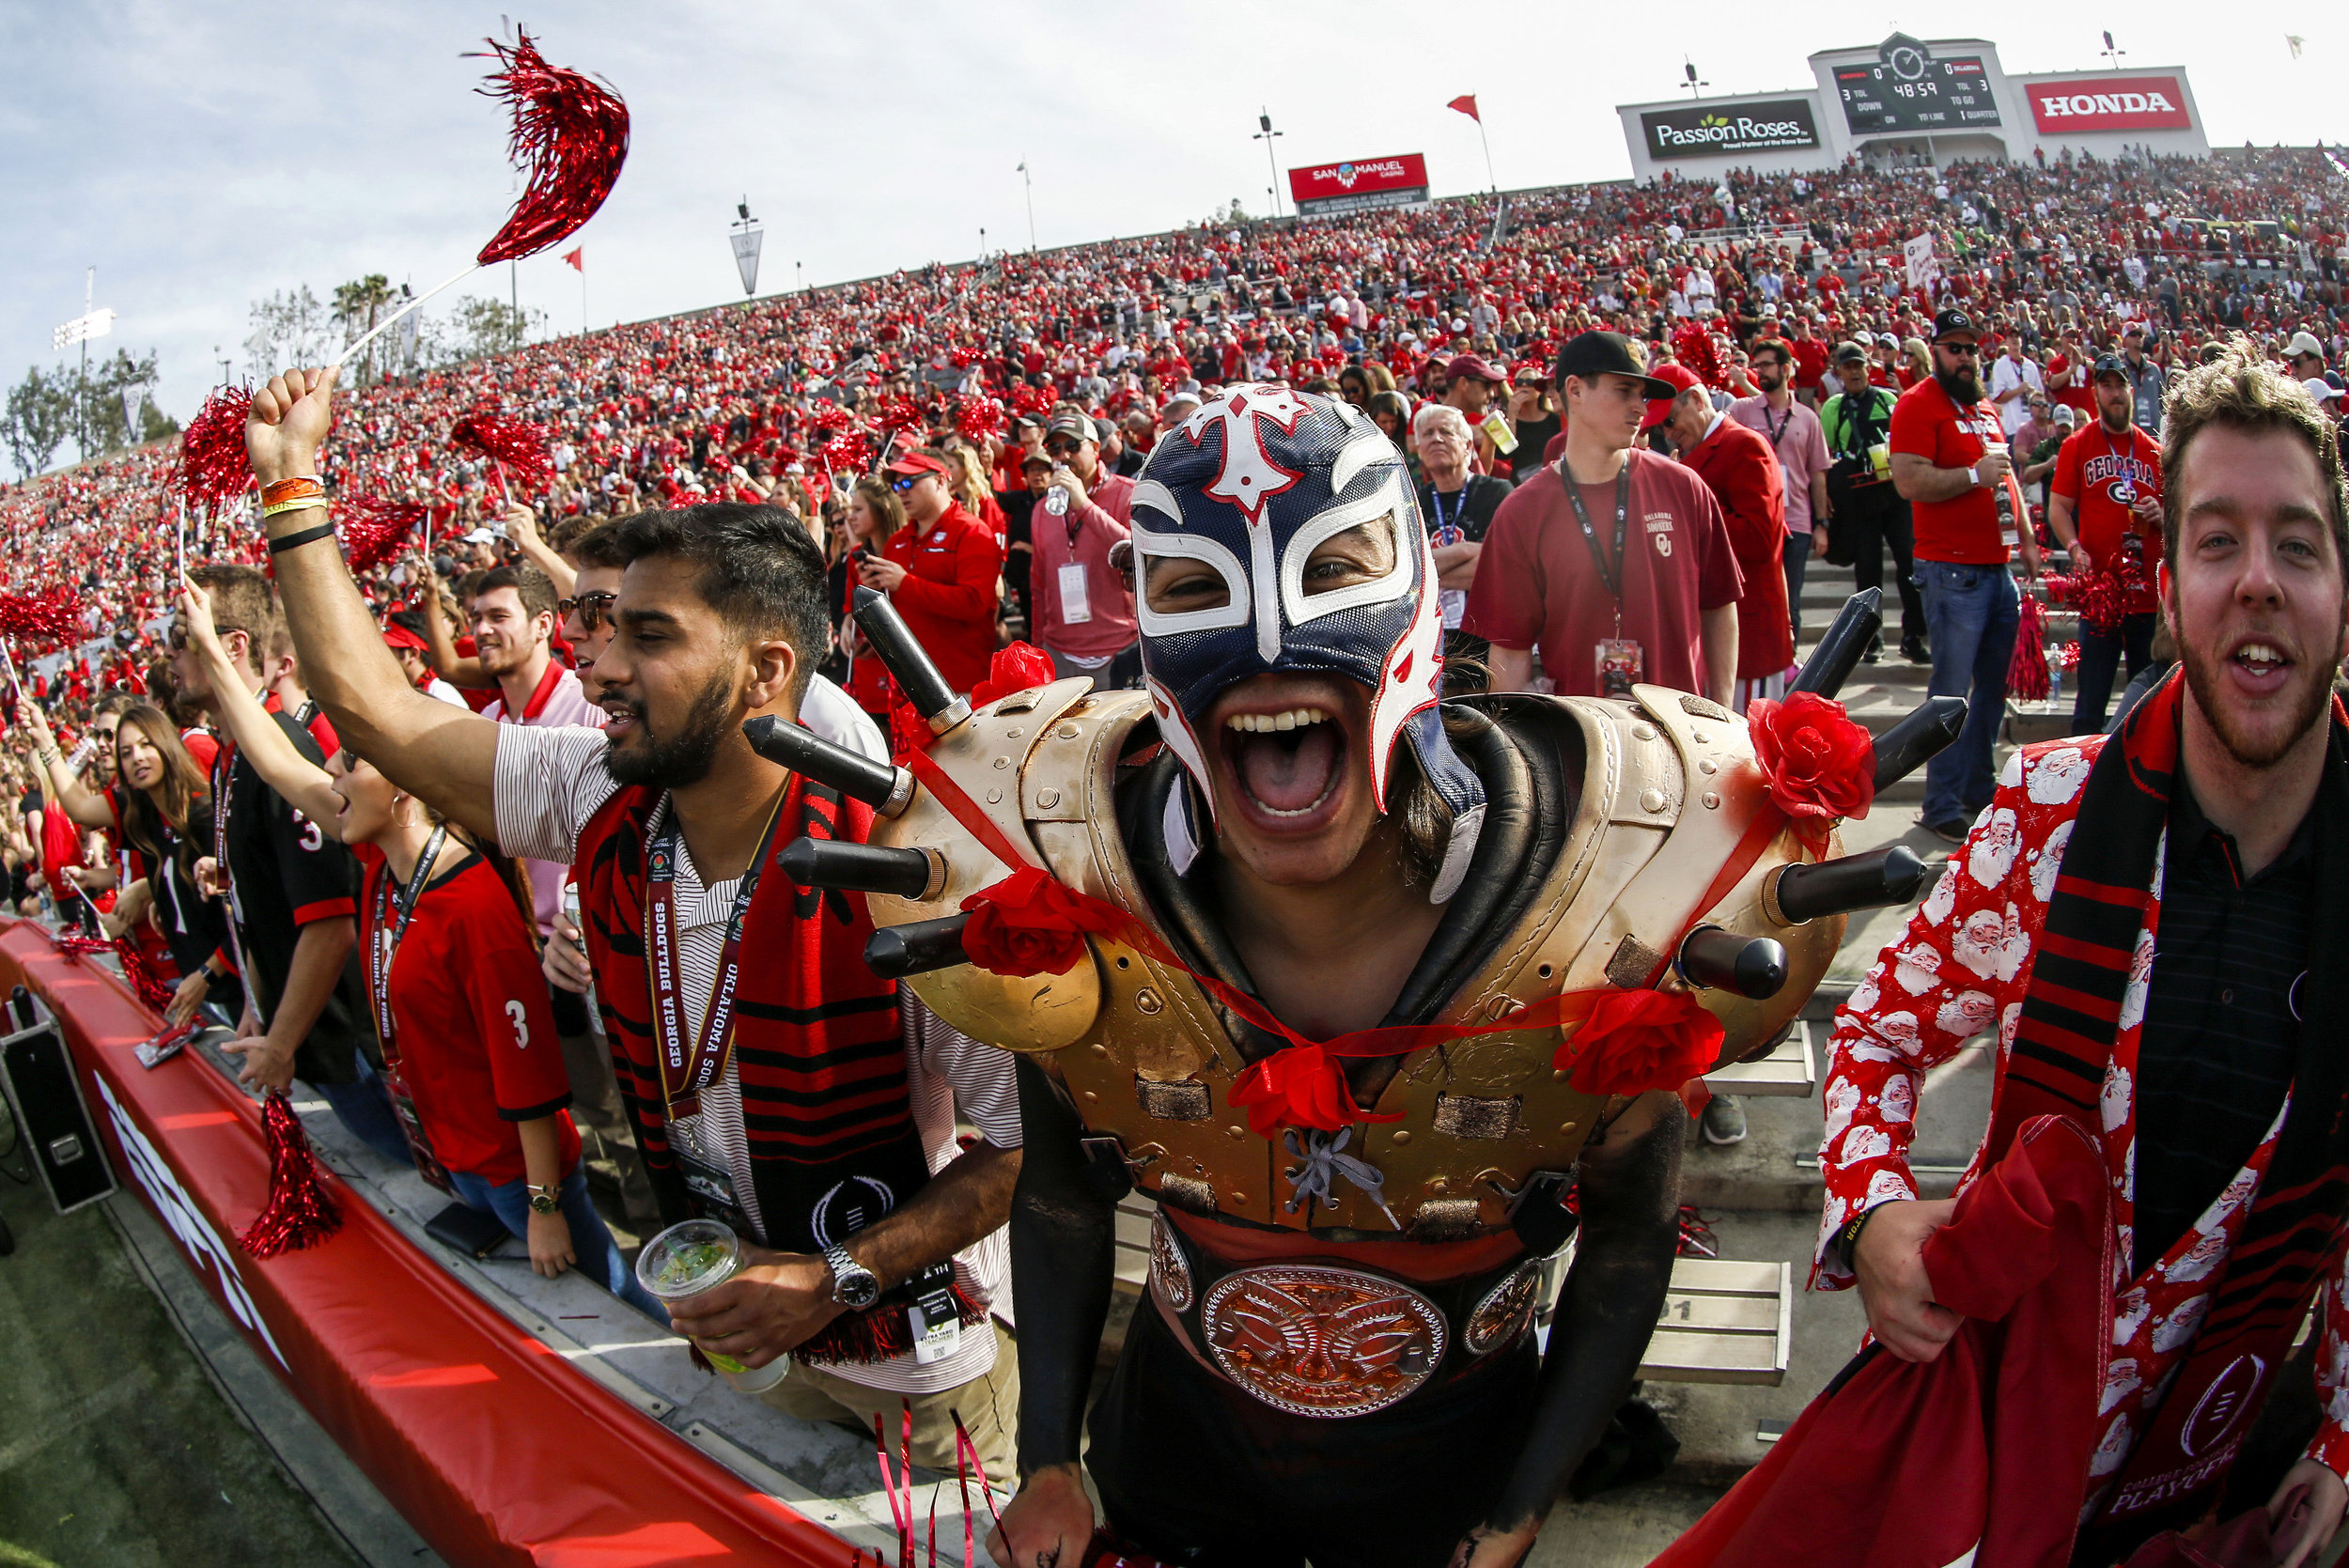  Fans of Georgia Bulldogs show their supports during the Rose Bowl NCAA college football game against Oklahoma Sooners Monday, Jan. 1, 2018, in Pasadena, California, the United States. Georgia Bulldogs won 54-48 in overtime.  